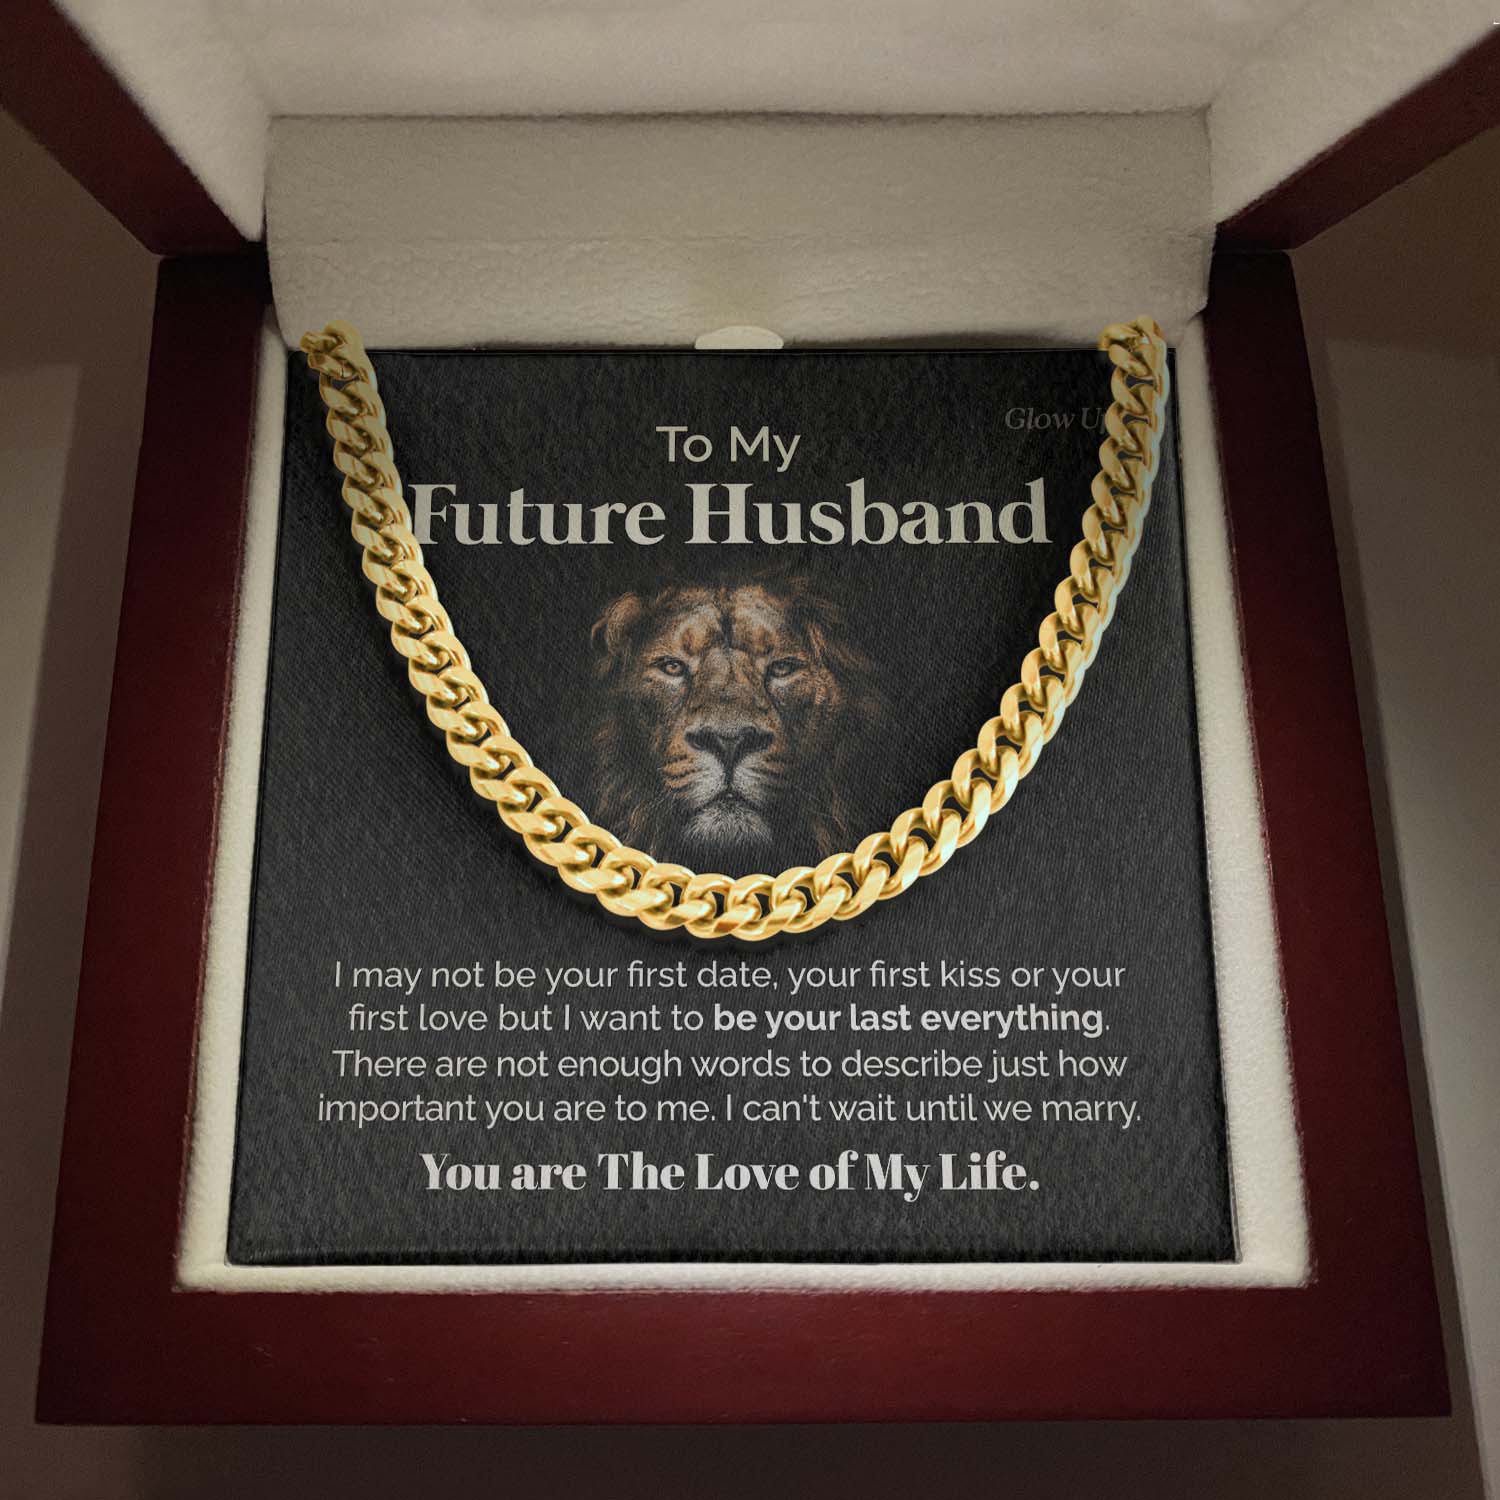 ShineOn Fulfillment Jewelry 14K Gold Over Stainless Steel Cuban Link Chain / Luxury Box To my Future Husband - You are the love of my life - Cuban Link Chain